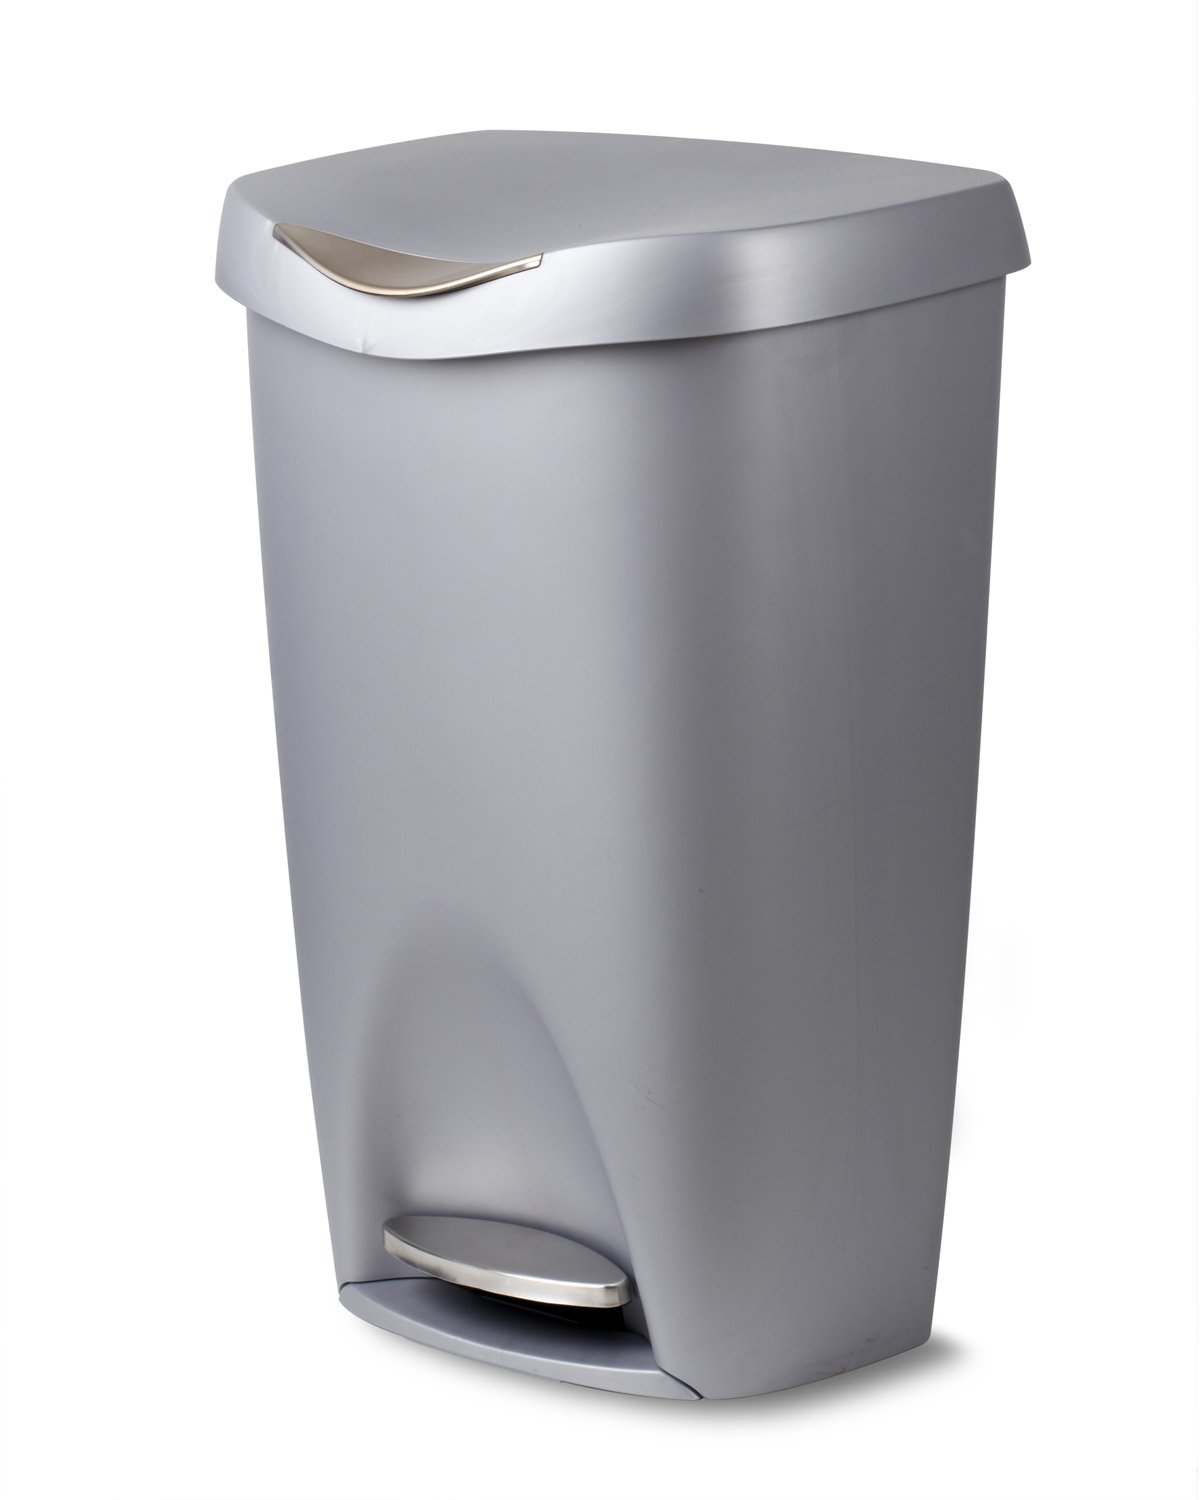 Umbra Brim 13 Gallon Trash Can with Lid - Large Kitchen Garbage Can with Stainless Steel Foot Pedal, Stylish and Durable, Silver/Nickel